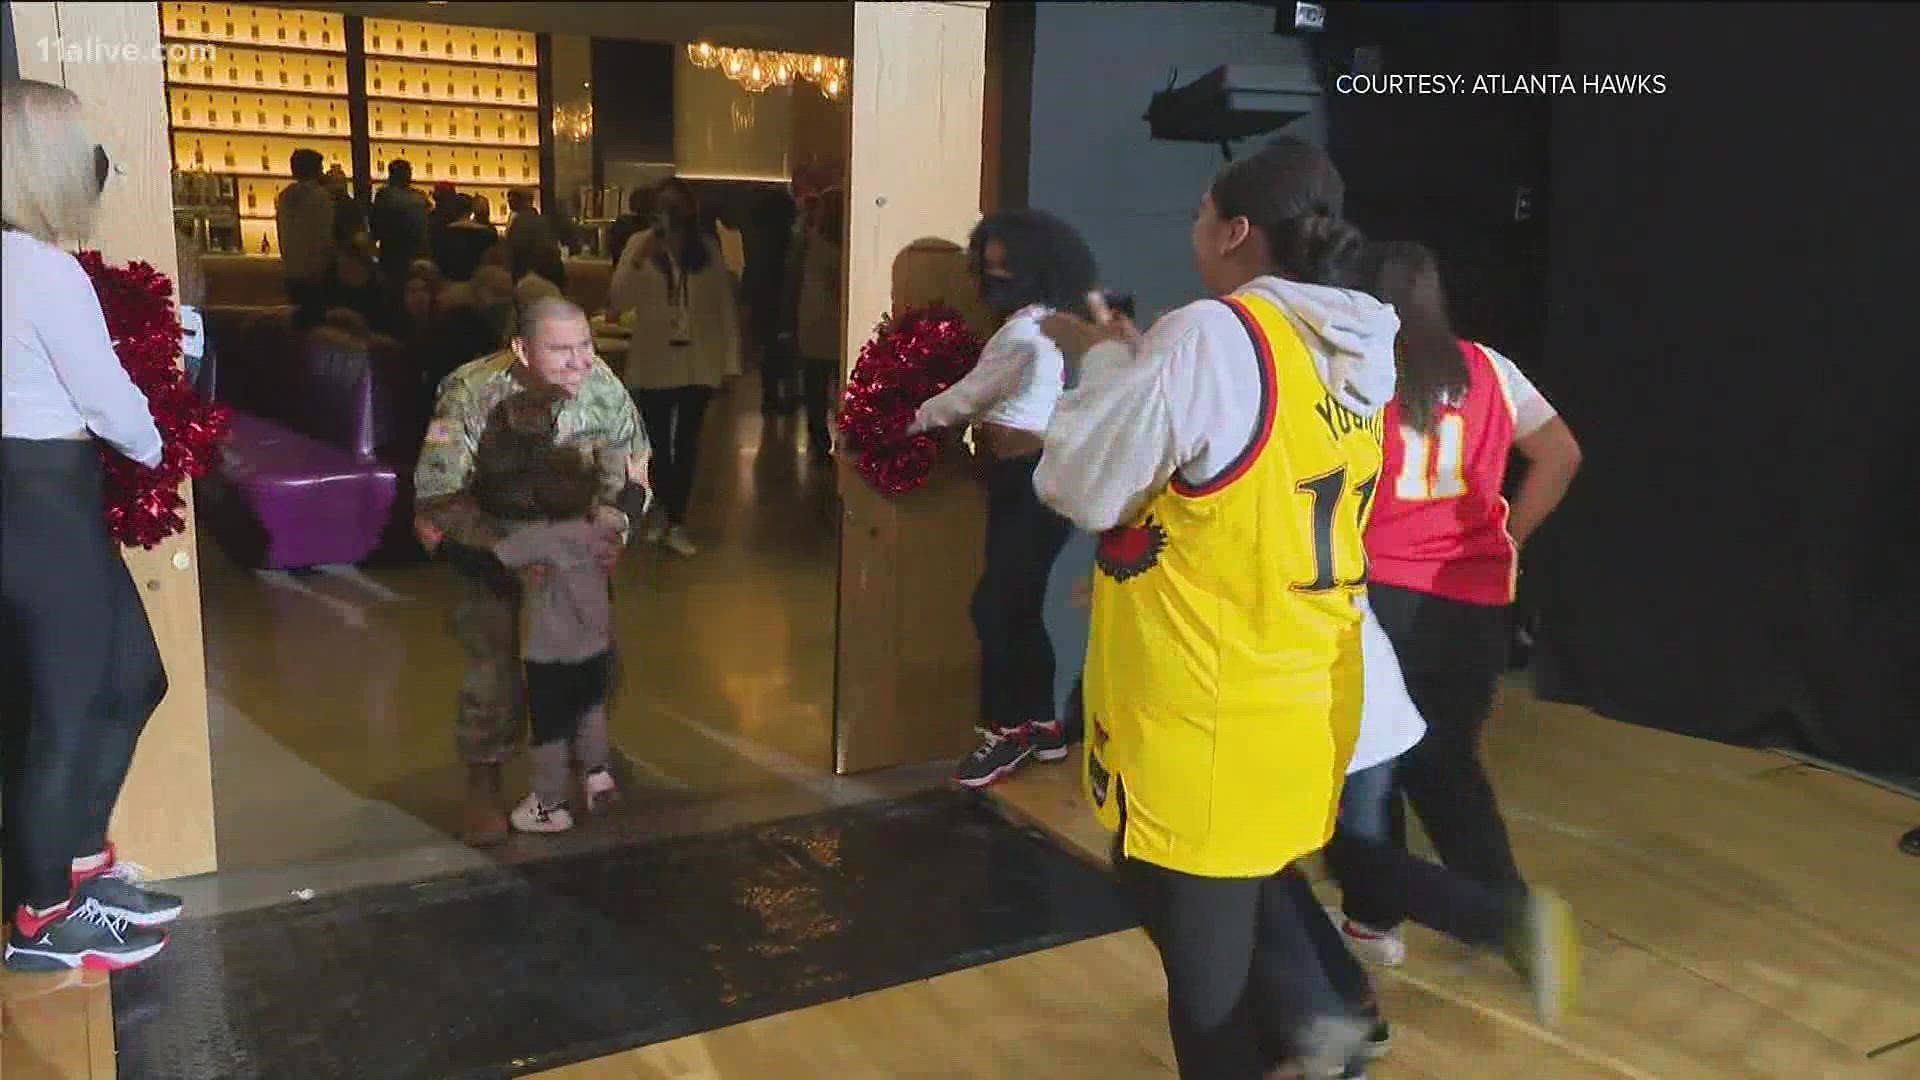 The Atlanta Hawks are helping one family come together for the holidays.